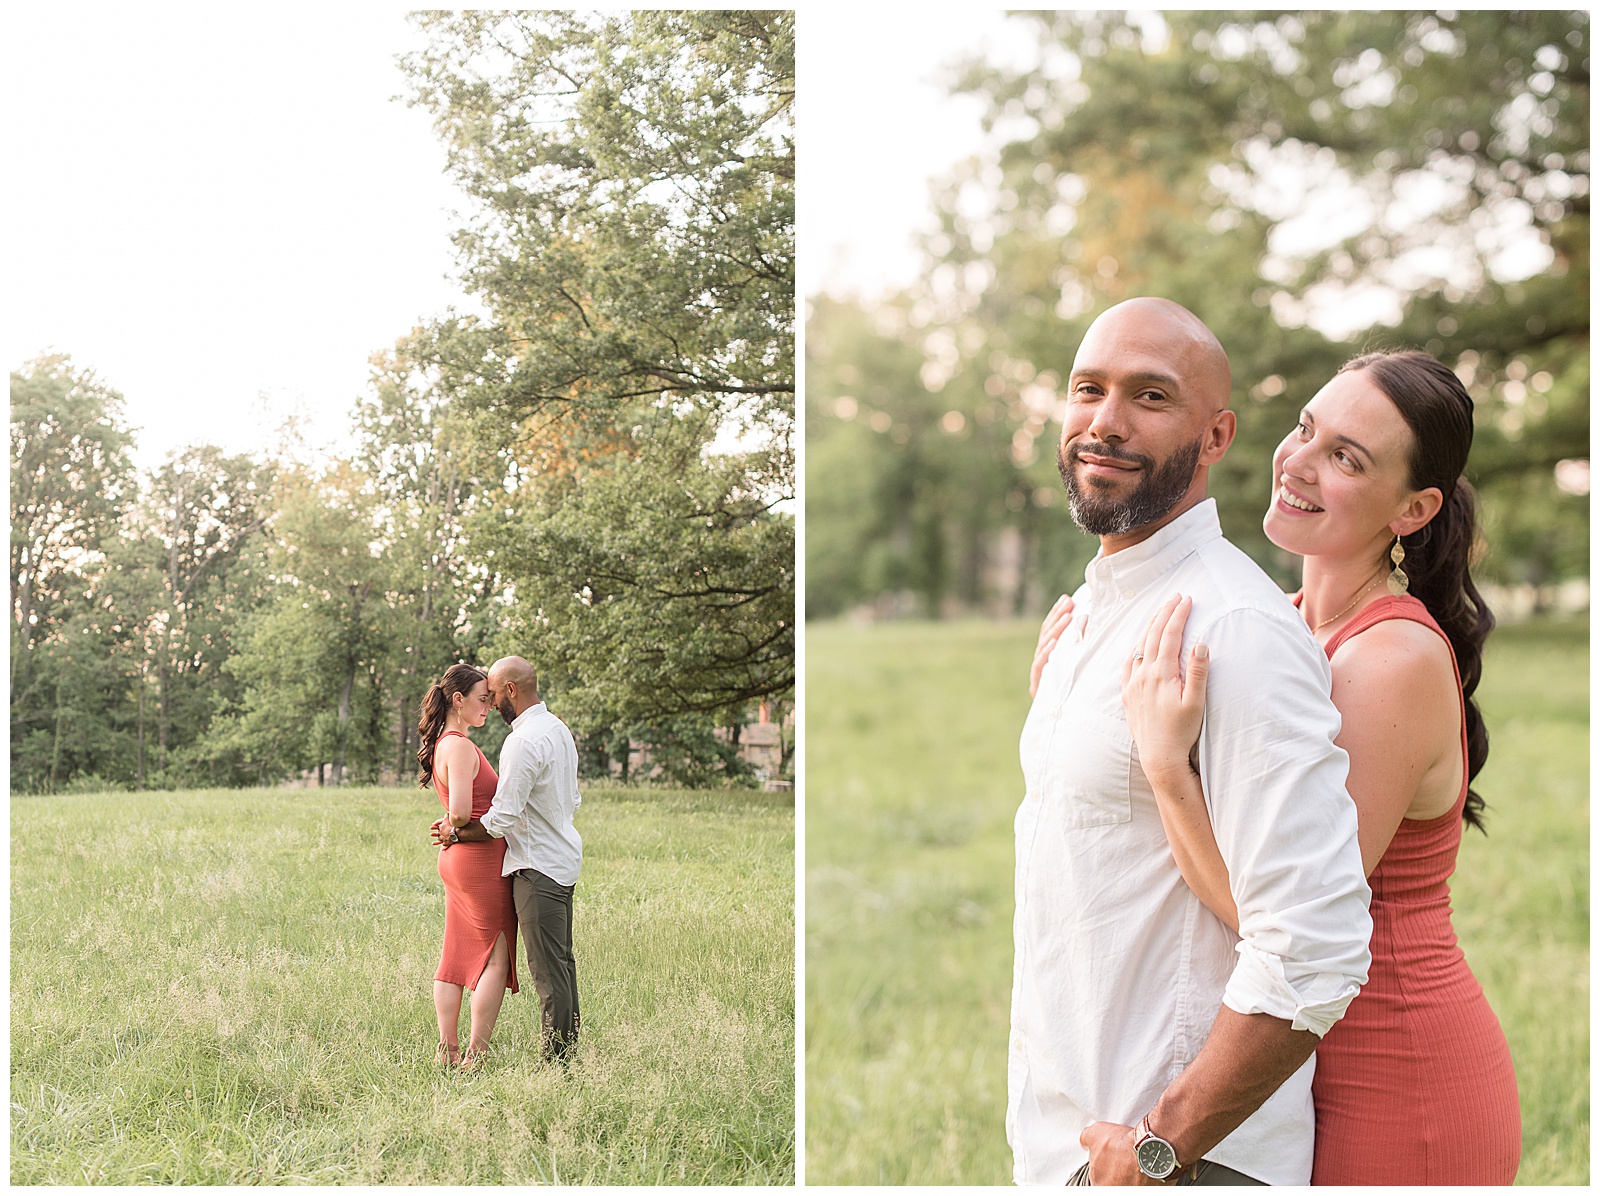 woman hugs guy tightly from behind as he smiles at camera in sunny grassy field